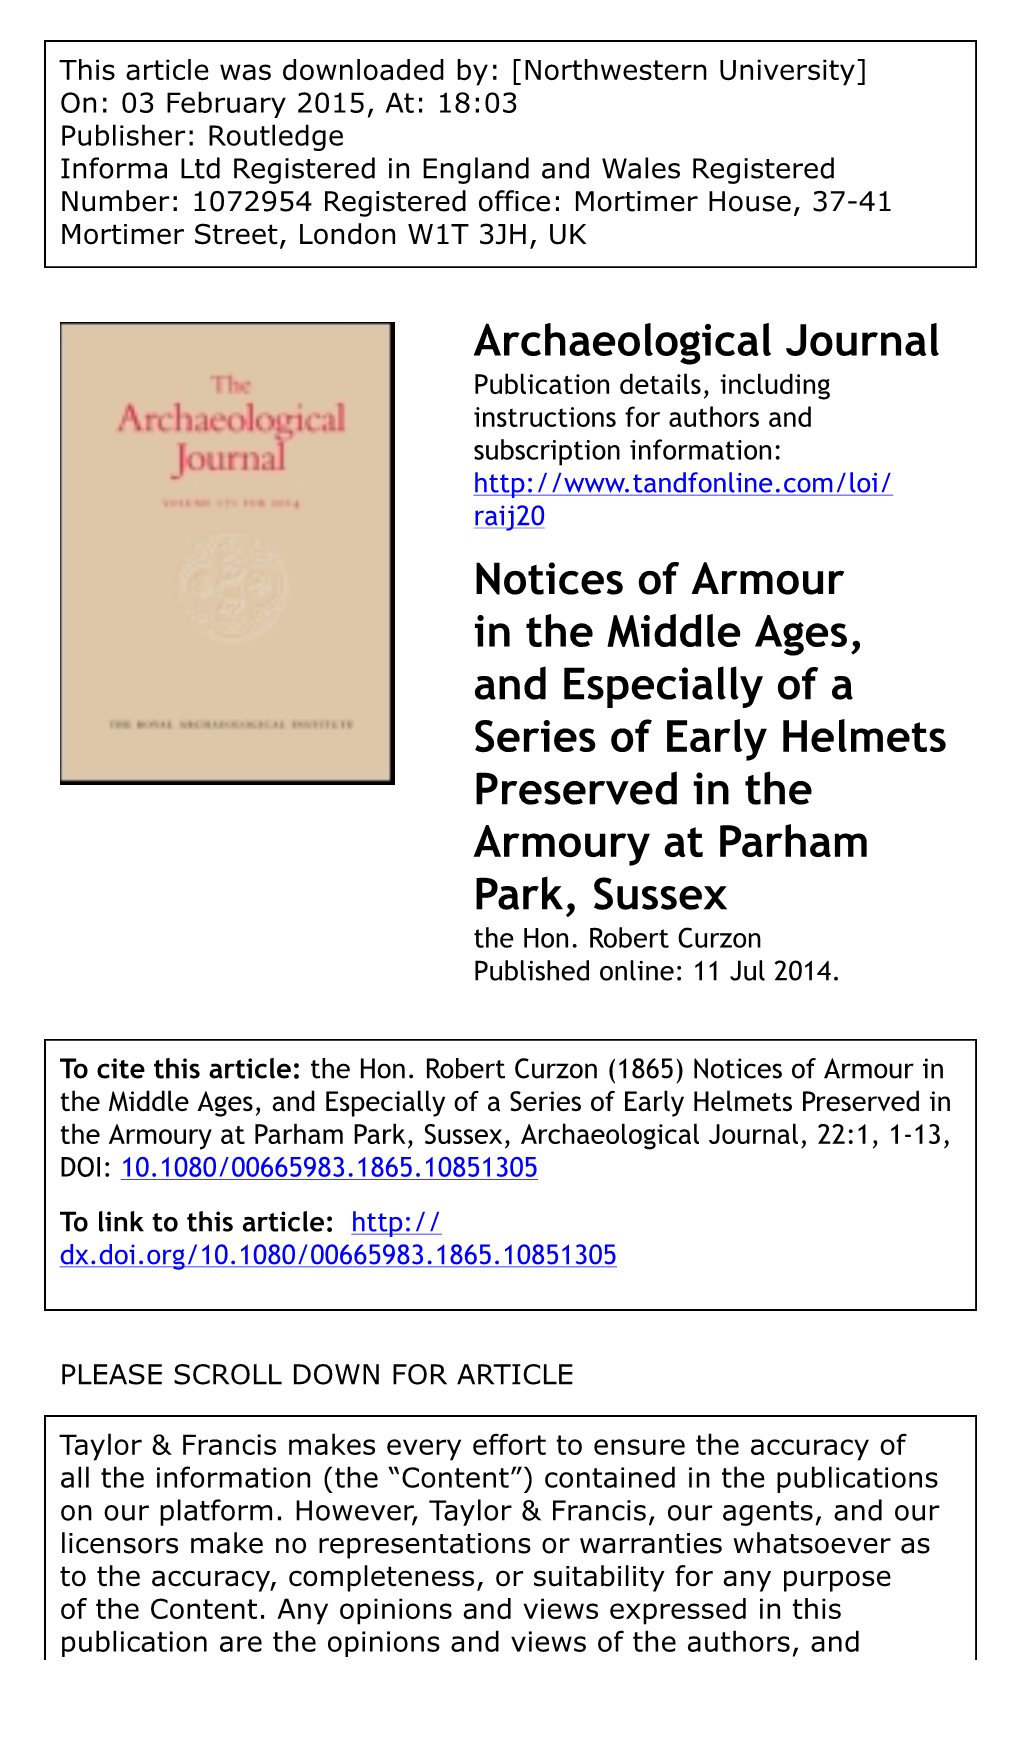 Archaeological Journal Notices of Armour in the Middle Ages, and Especially of a Series of Early Helmets Preserved in the Armour